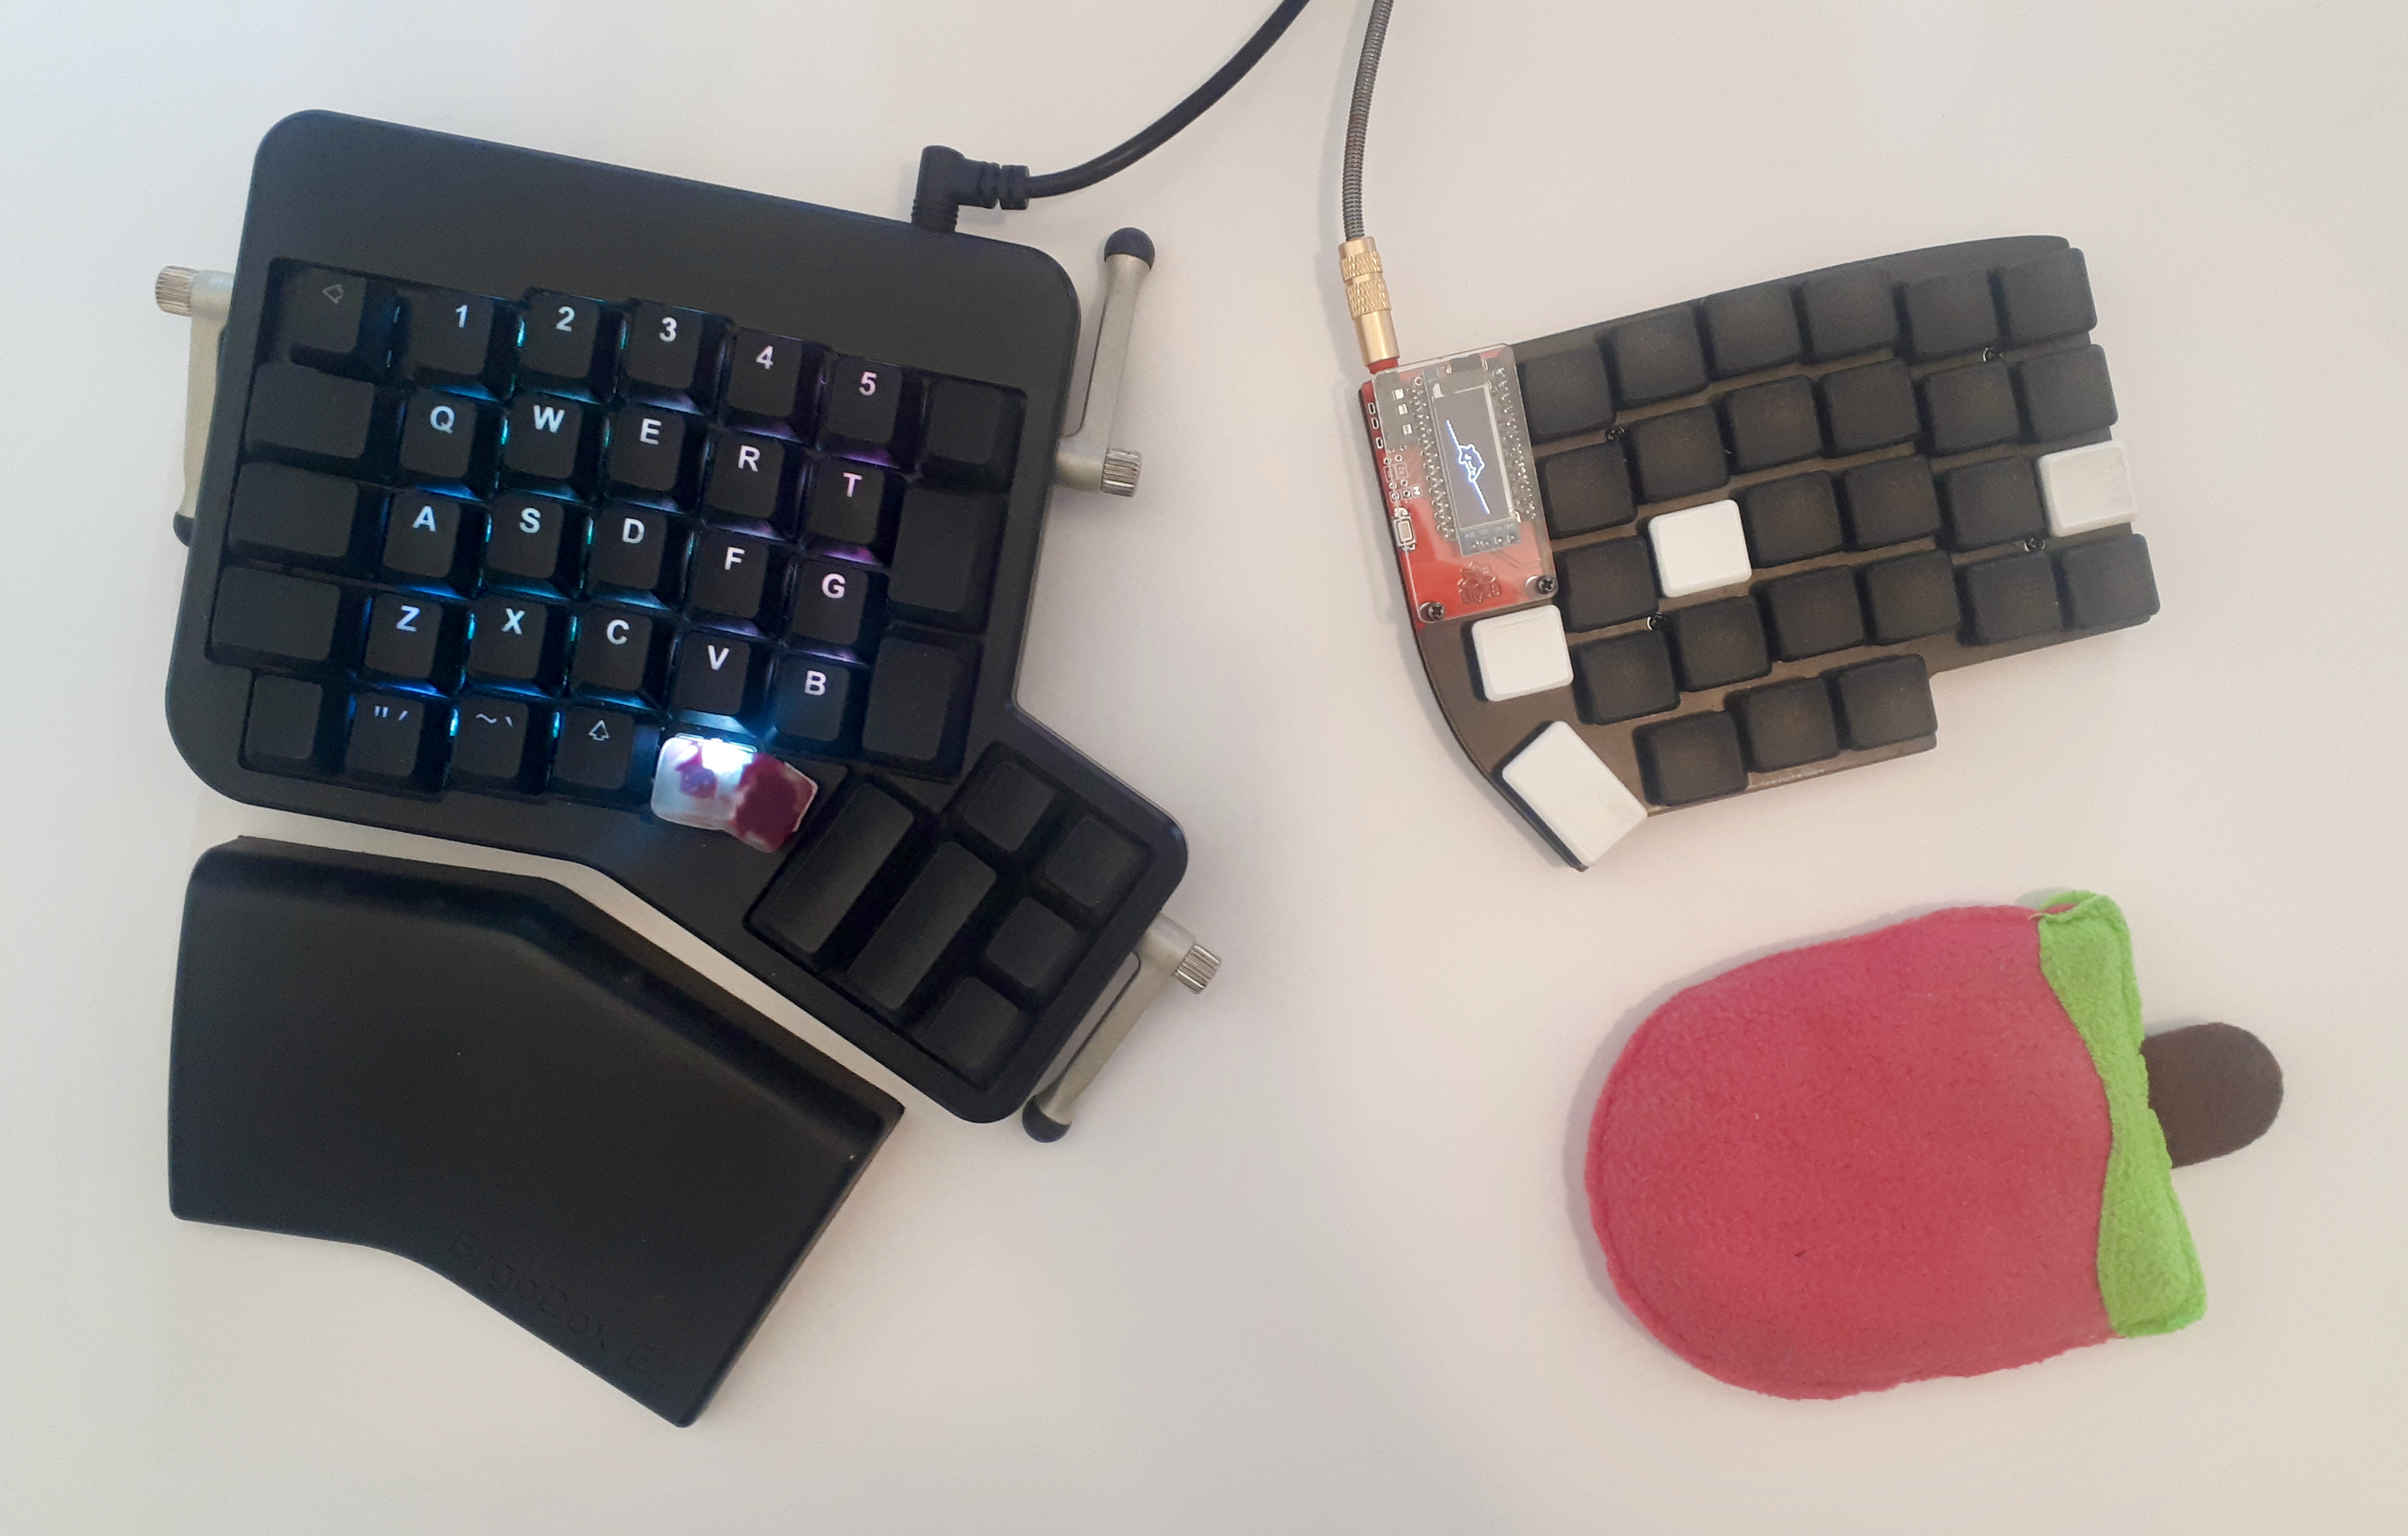 Lily58 next to an Ergodox. Lily58 is smaller.